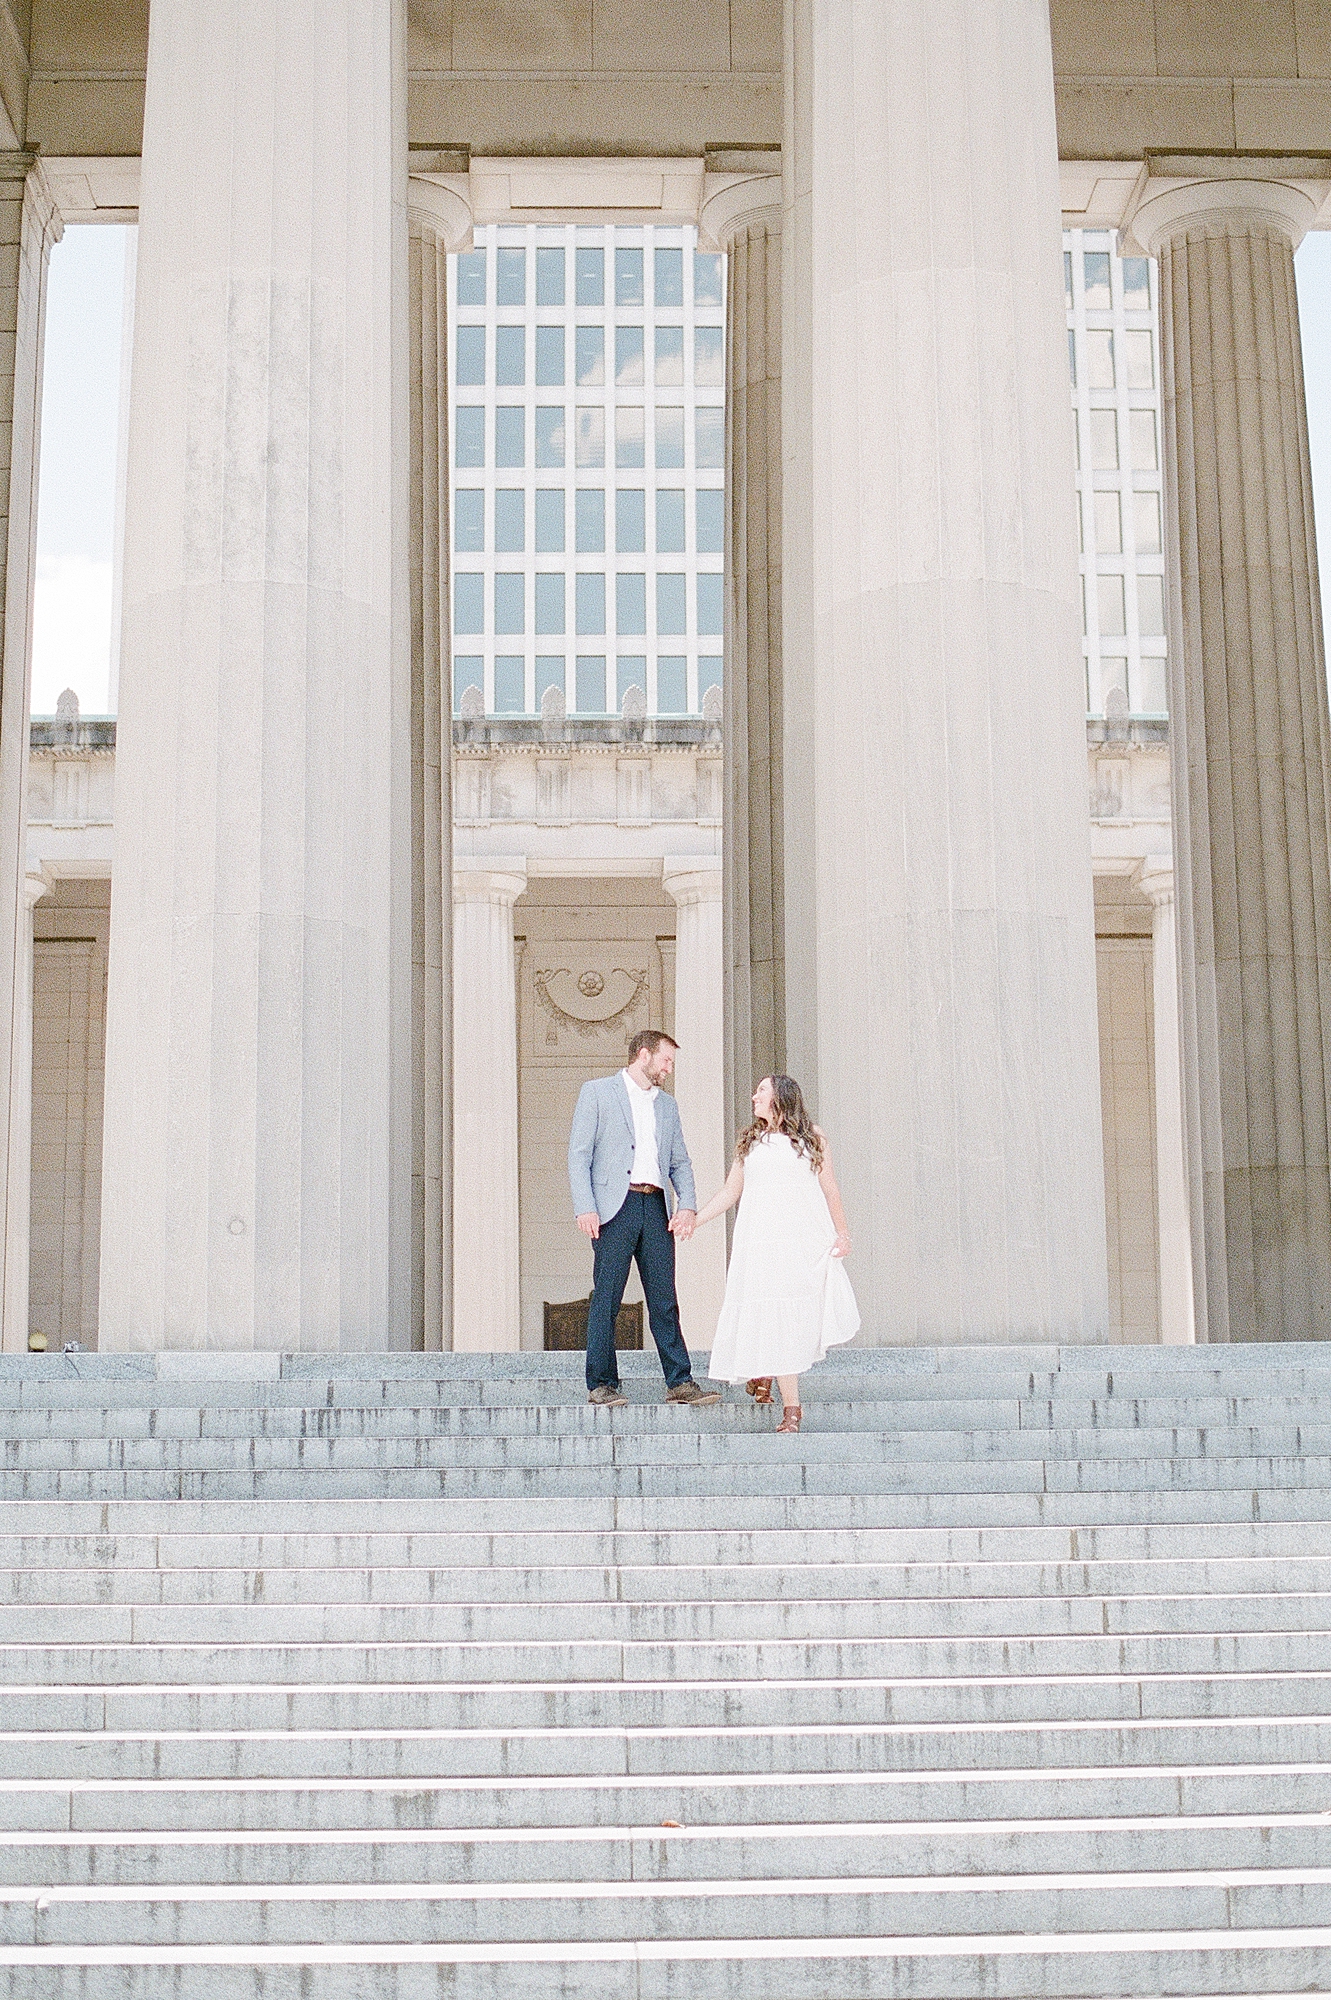 a husband and wife are celebrating their 4 year wedding anniversary with portraits on fuji400h film with Nashville engagement and family photographer Dolly DeLong Photographer at the War Memorial in Nashville